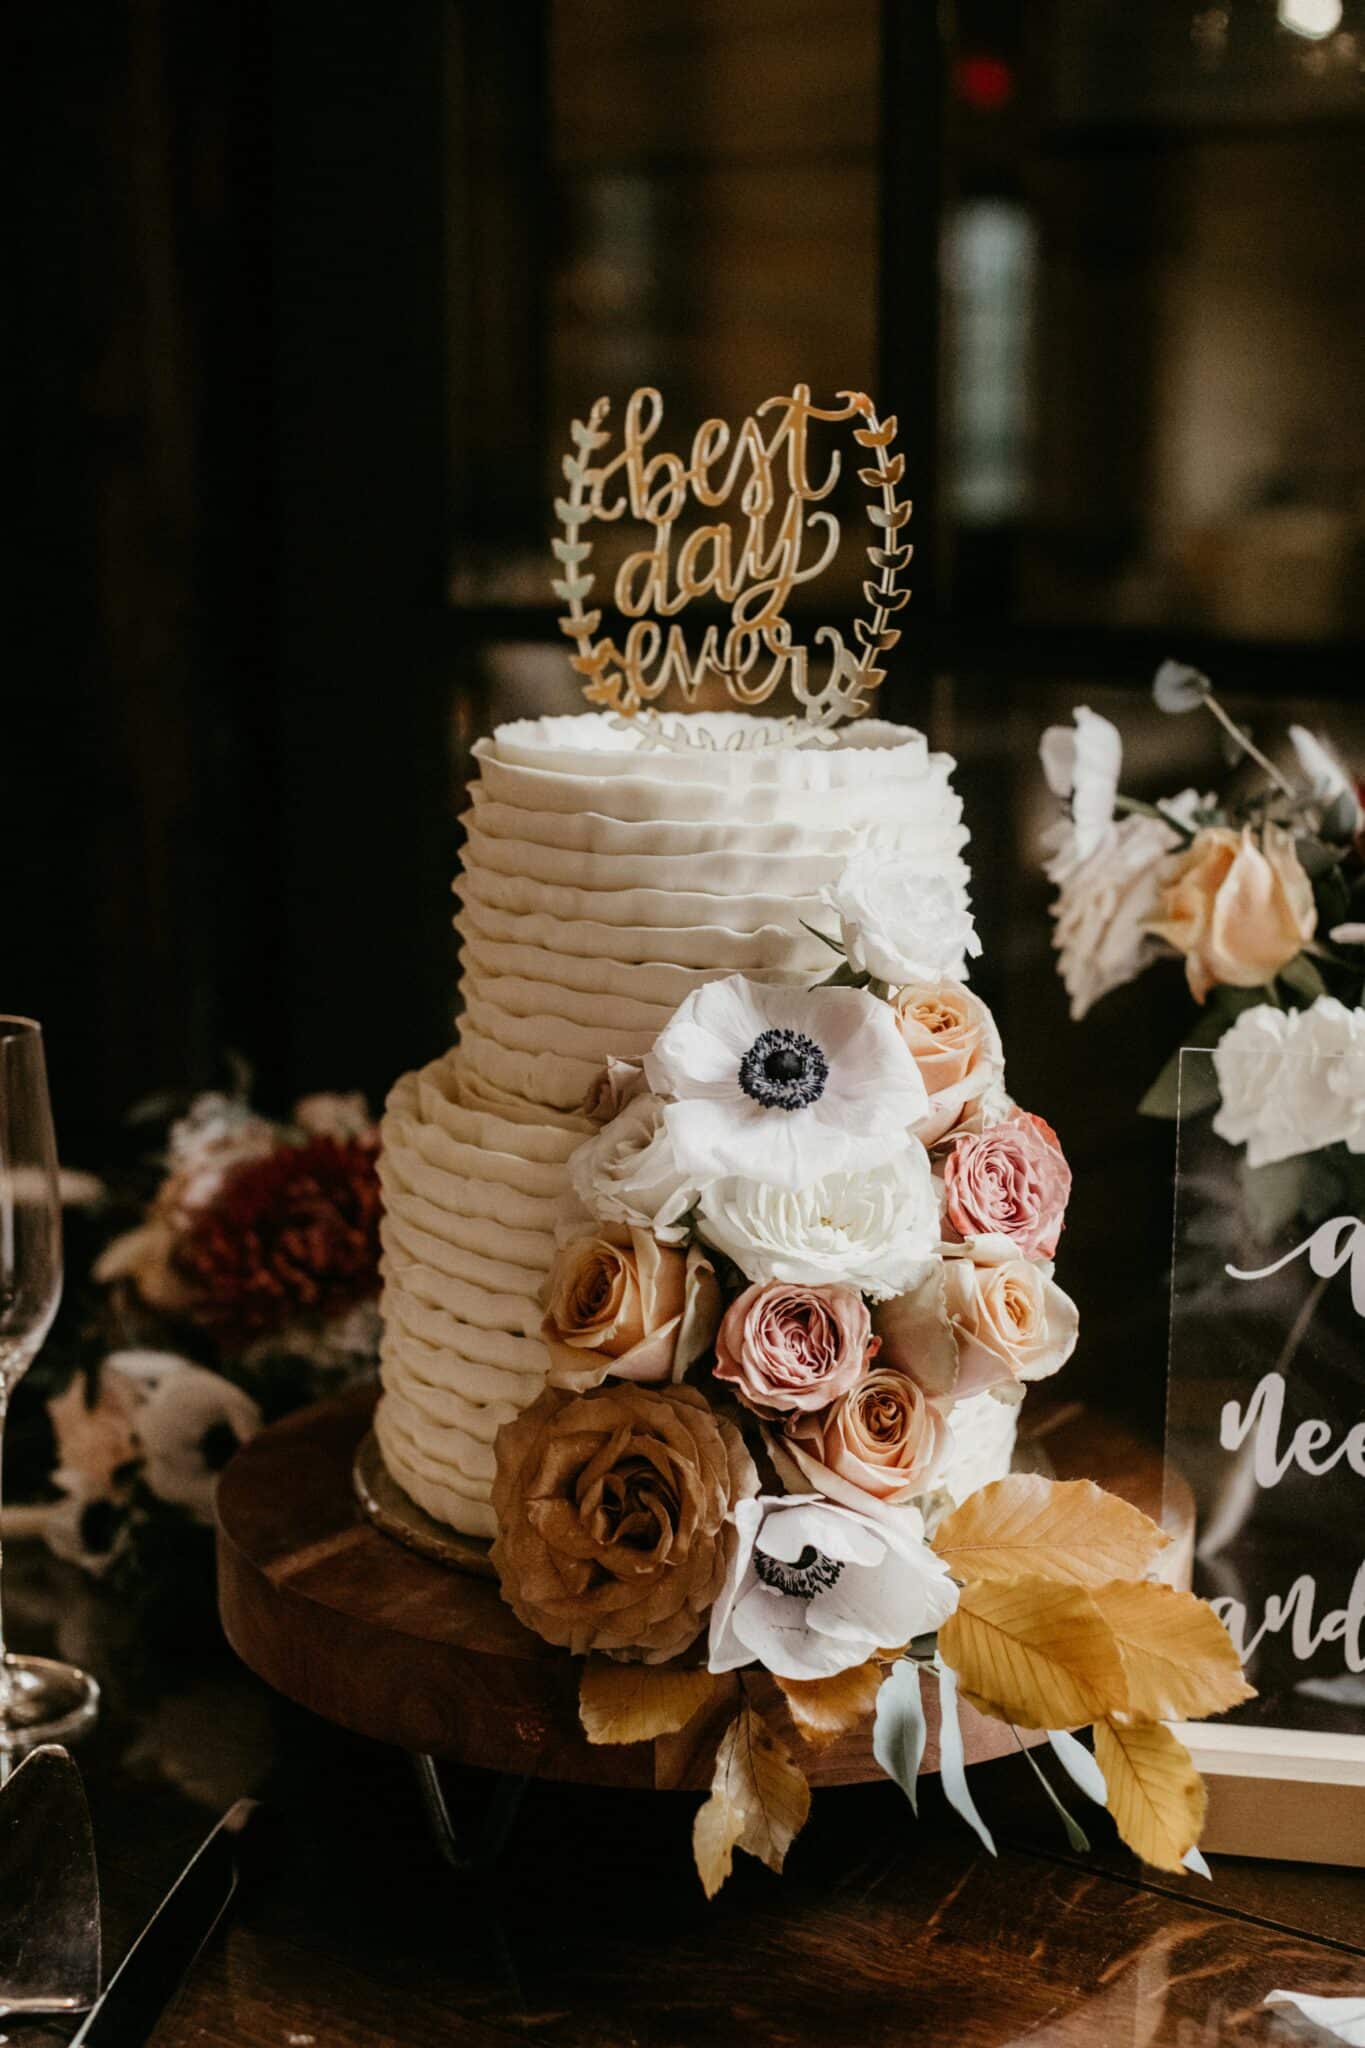 cute wedding cake with topper reading "best day ever"